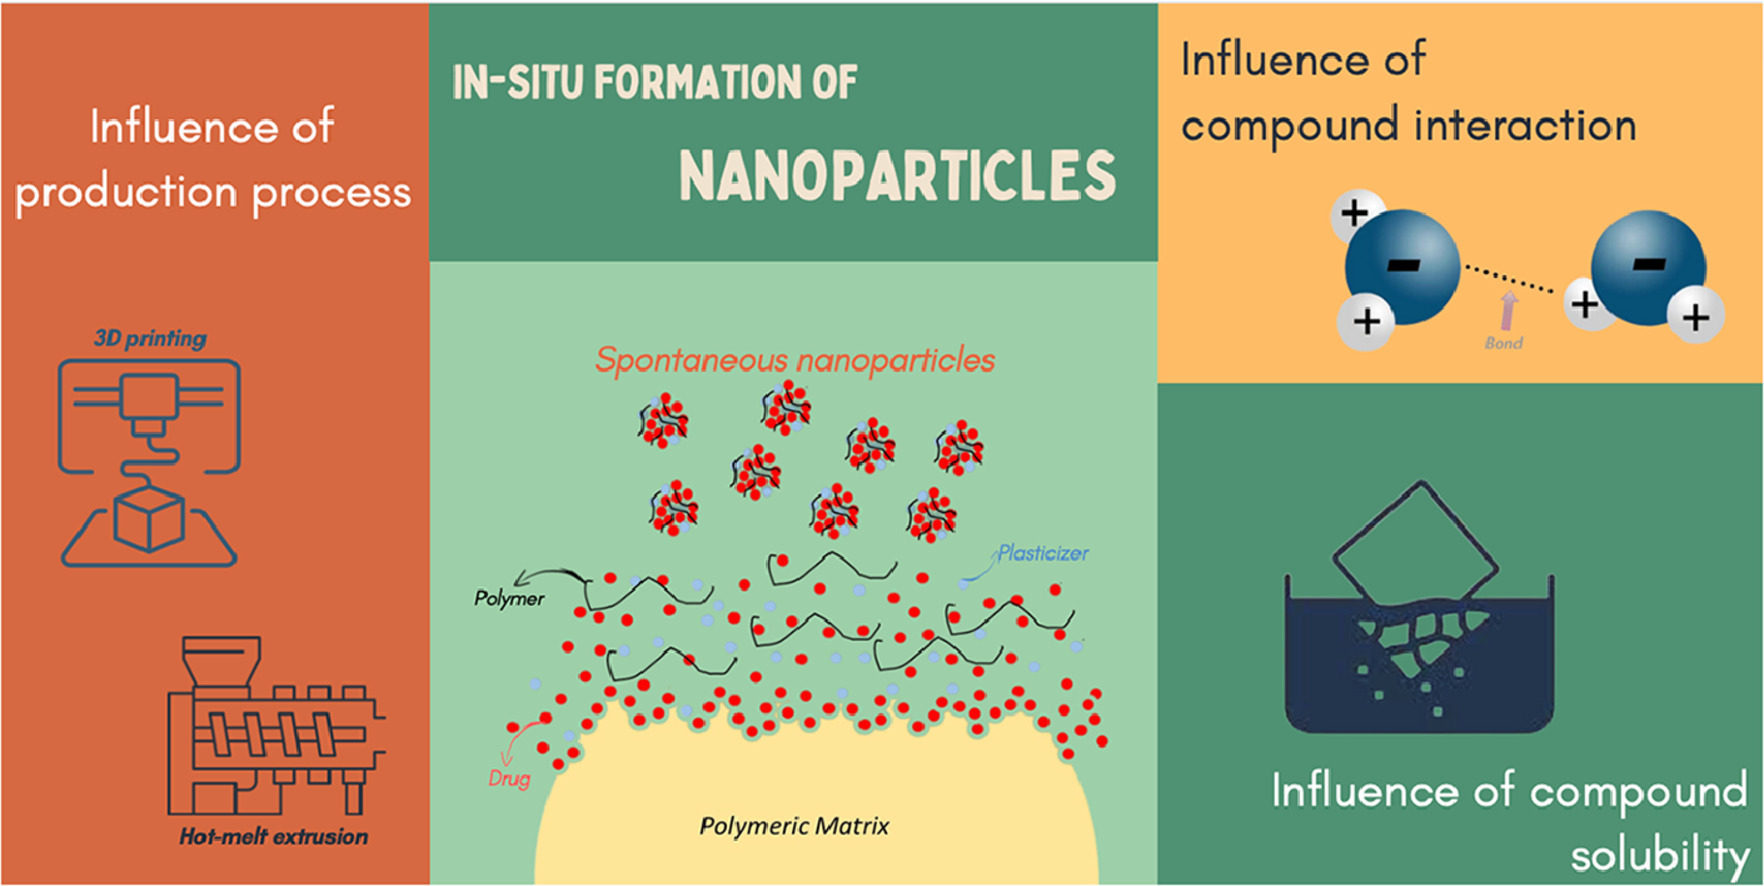 In-situ formation of nanoparticles from drug-loaded 3D polymeric matrices